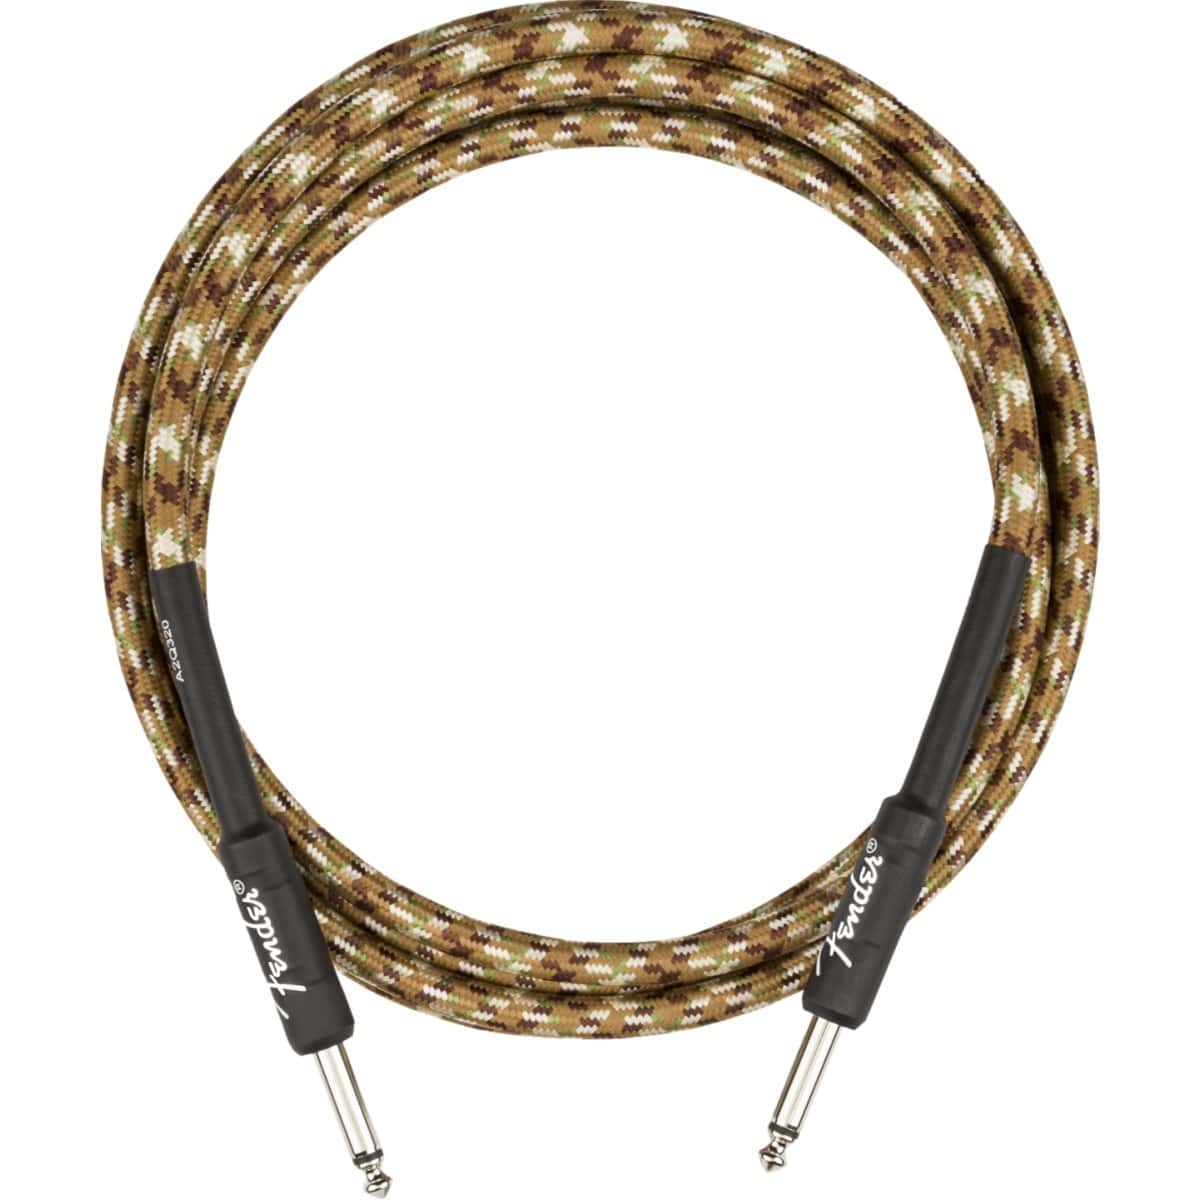 Fender Guitar Accessories Fender Guitar Cable Professional Series 10FT Desert Camo - Byron Music